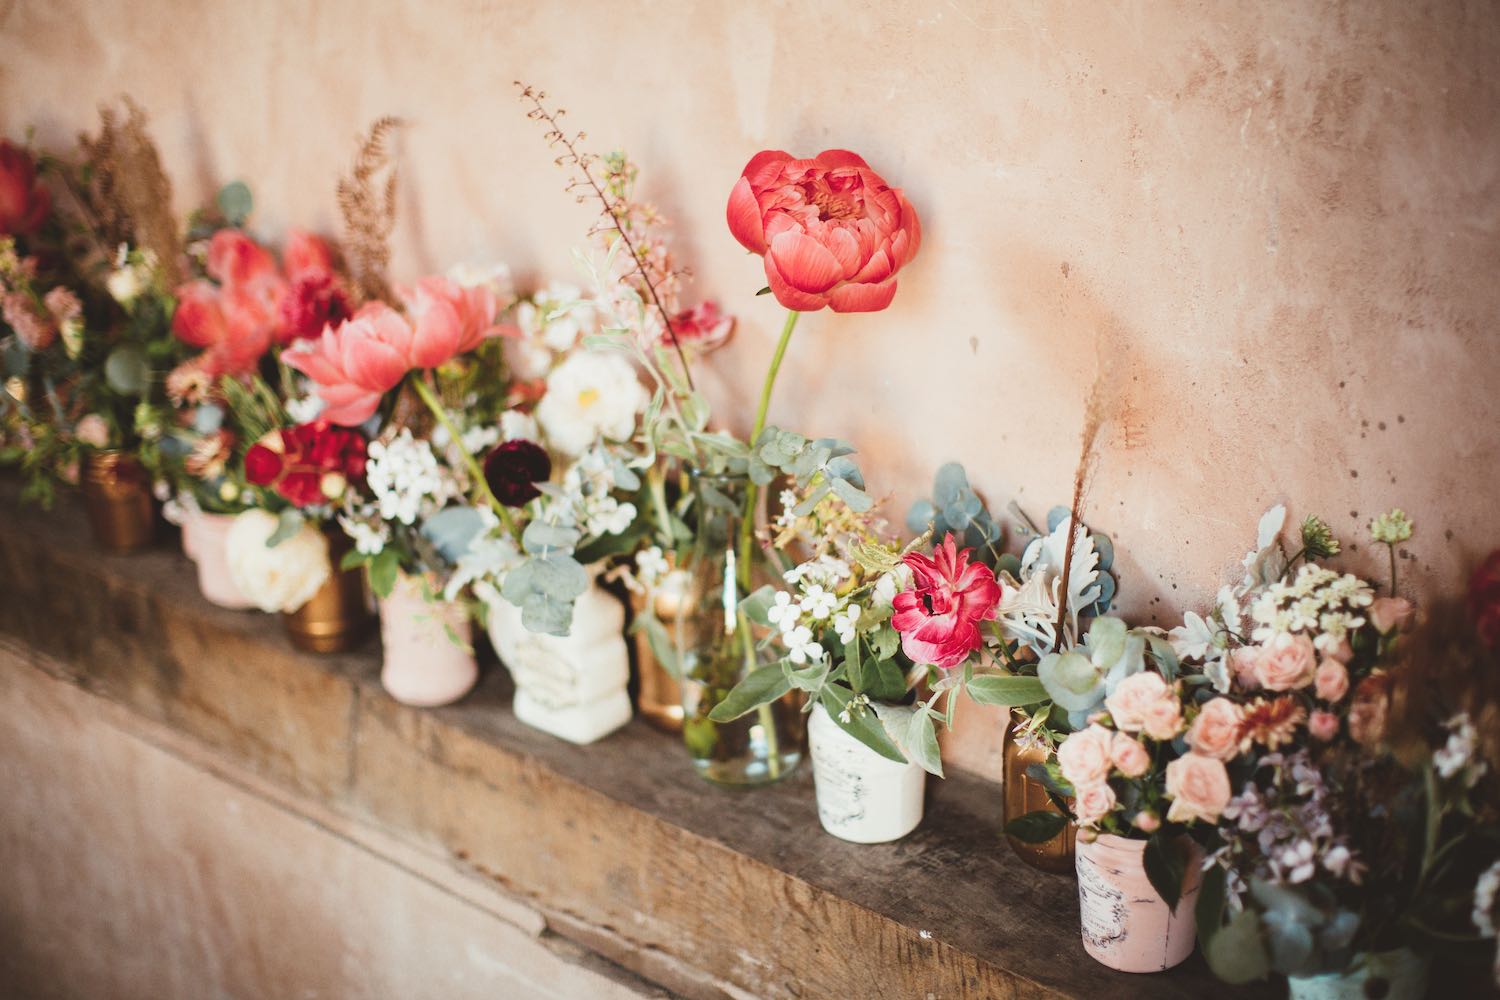 Coral and mint flowers in jars in barn wedding